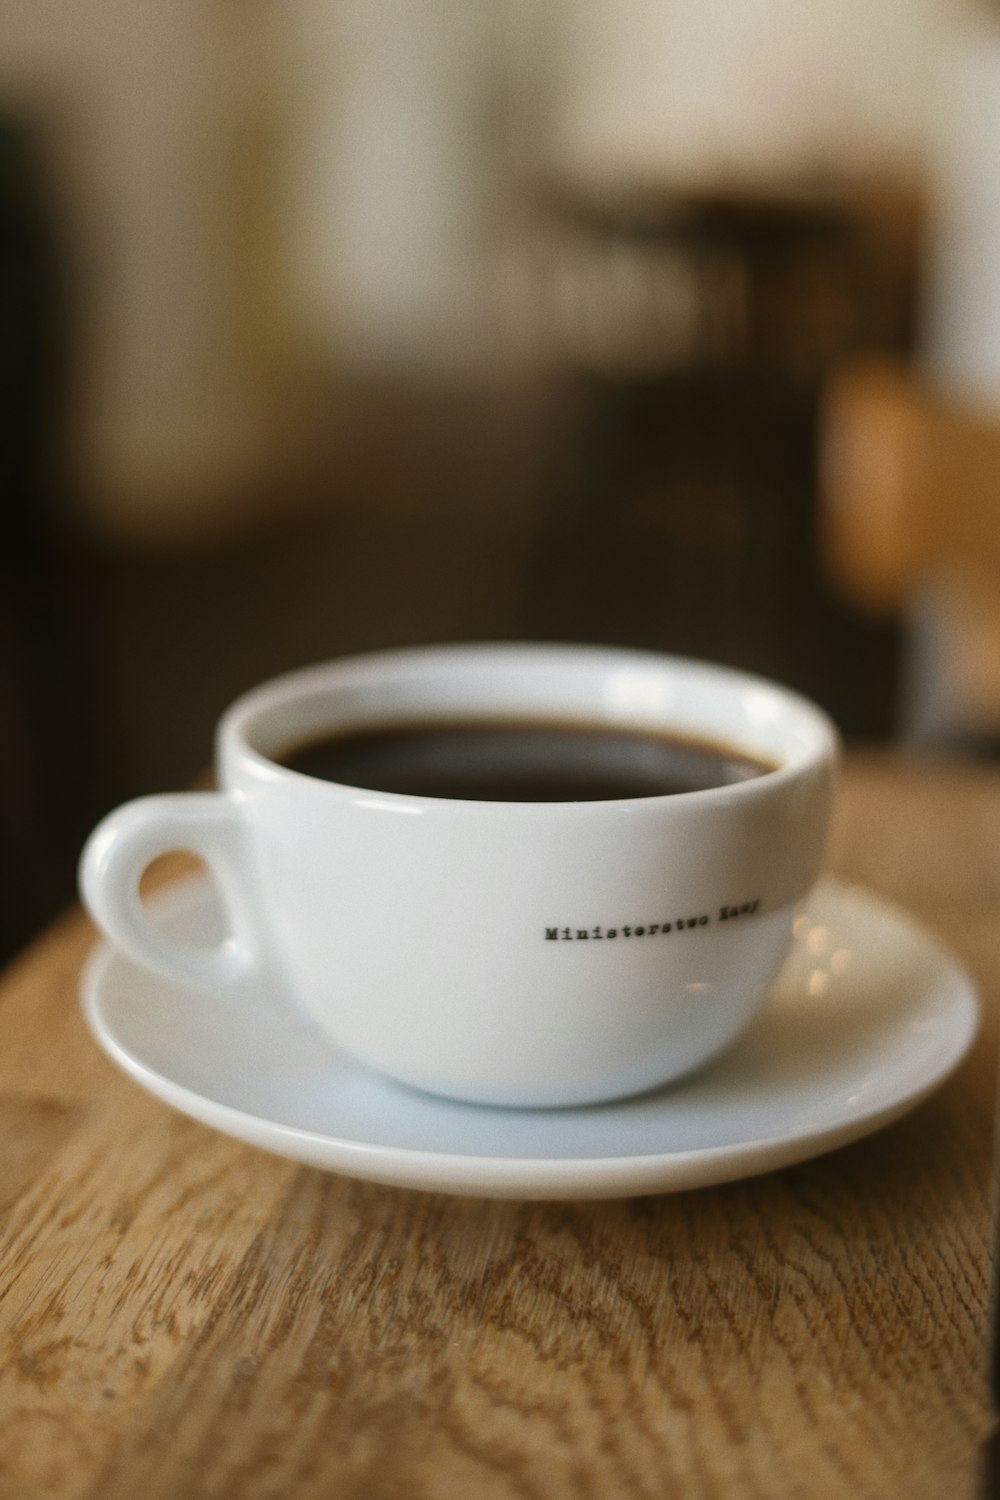 a white cup with a black logo on it